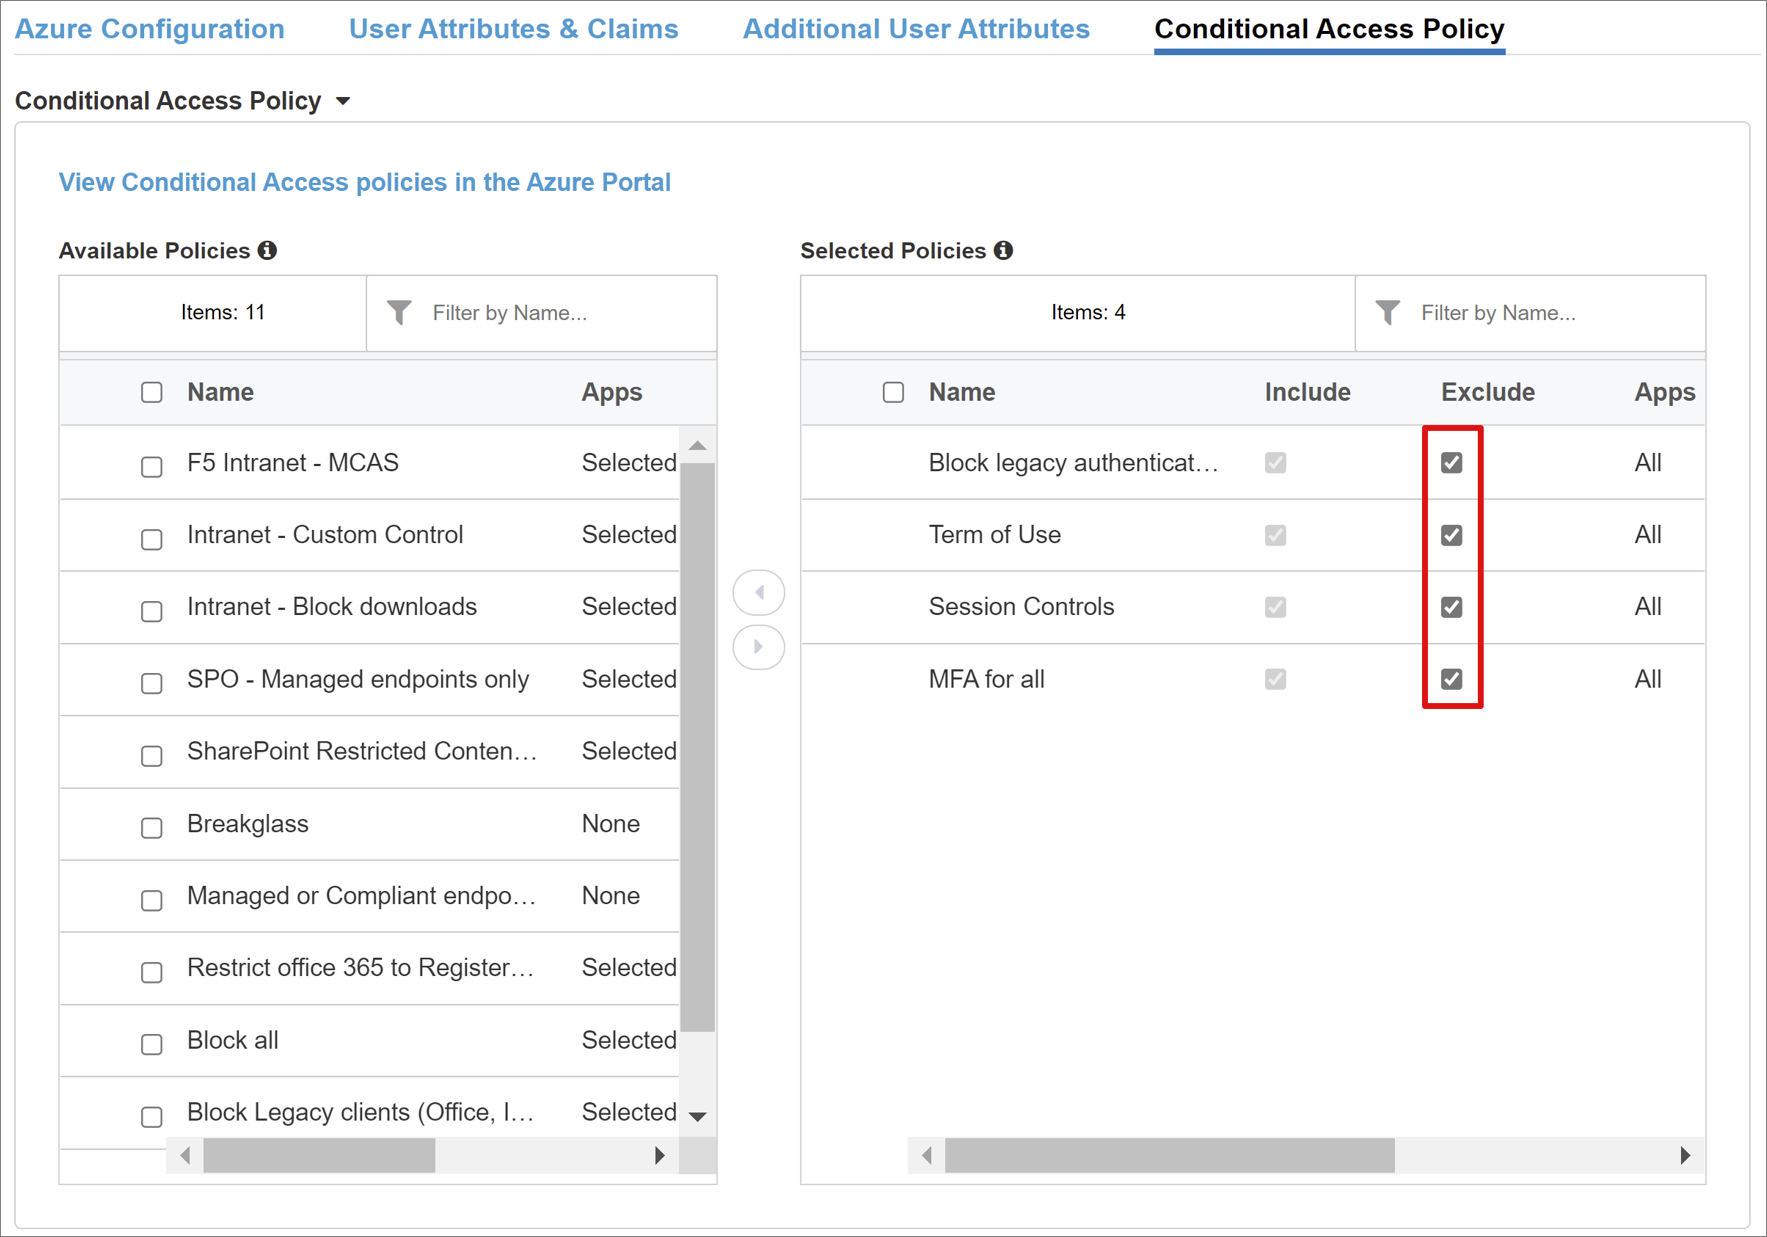 Screenshot of excluded policies, under Selected Policies, on Conditional Access Policy.